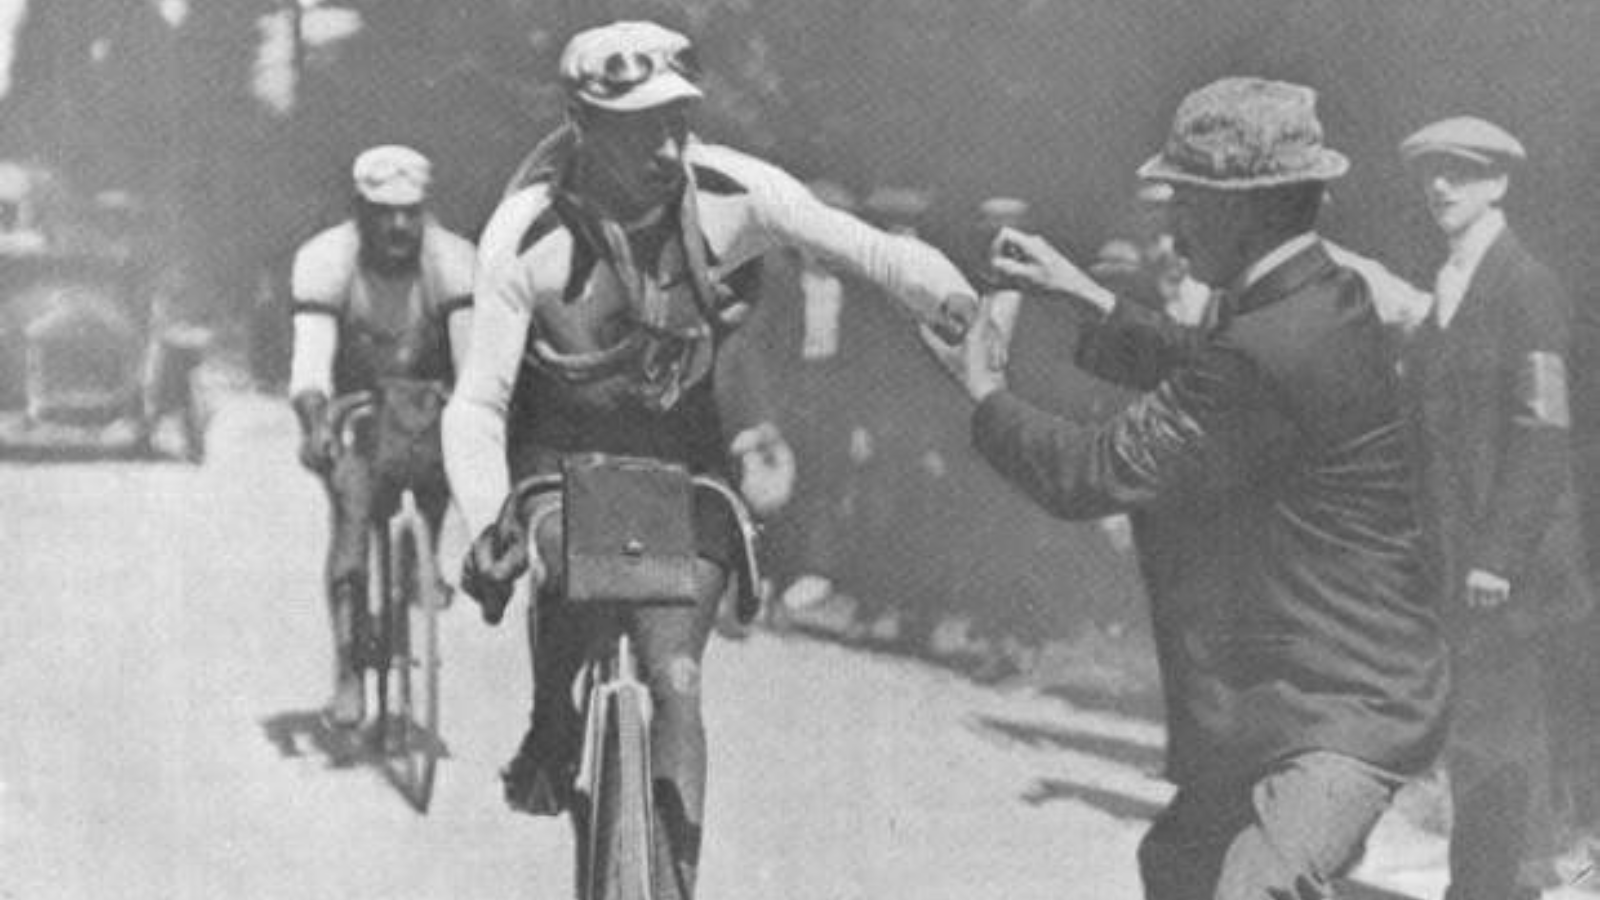 French cyclist and 2nd in overall, Paul Duboc at a checkpoint at Tour de France 1911